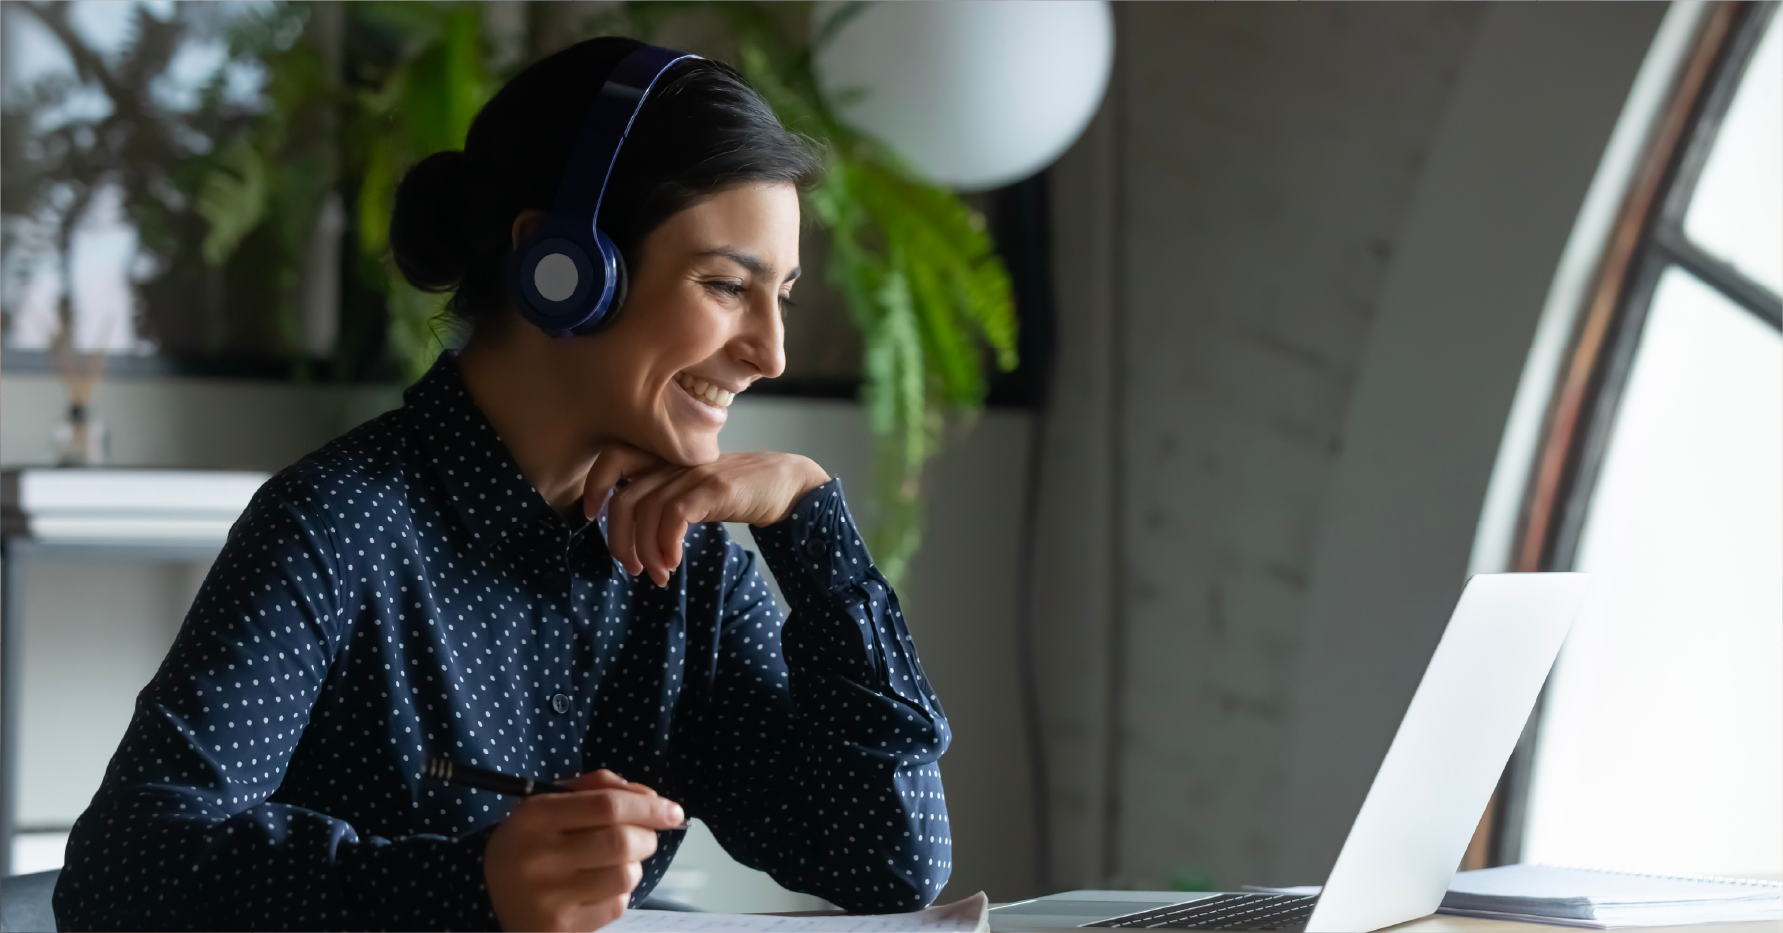 Photograph of a sales rep on a discovery call wearing headphones smiling at a laptop